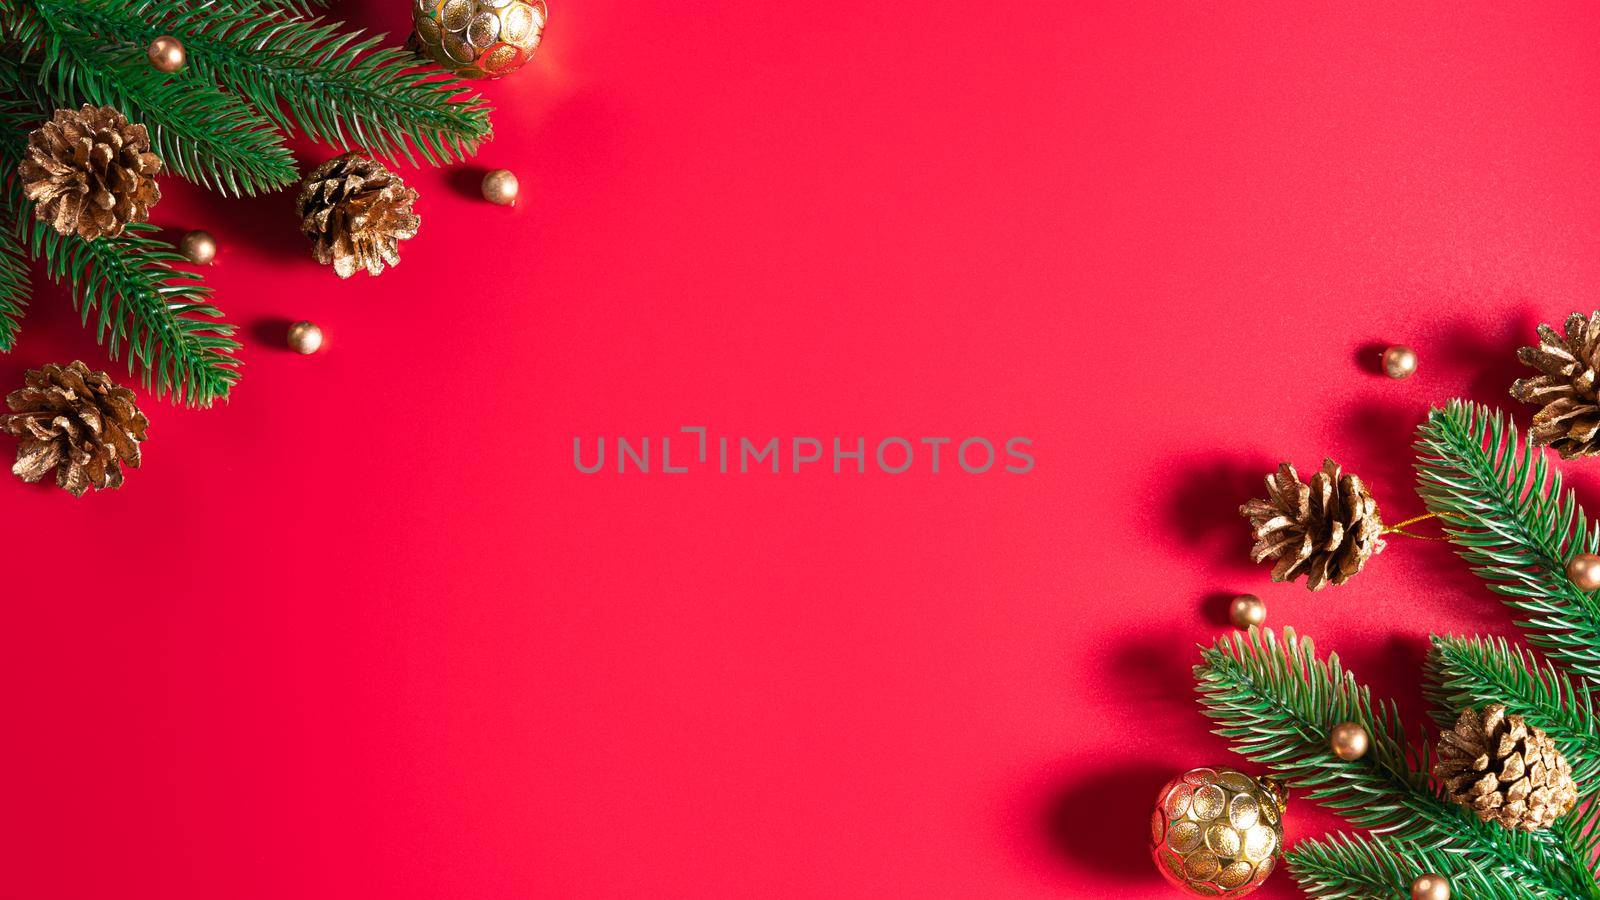 Christmas background. Top view of Christmas decorations on red background with copy space for text. Flat lay, winter, postcard template, new year concept.